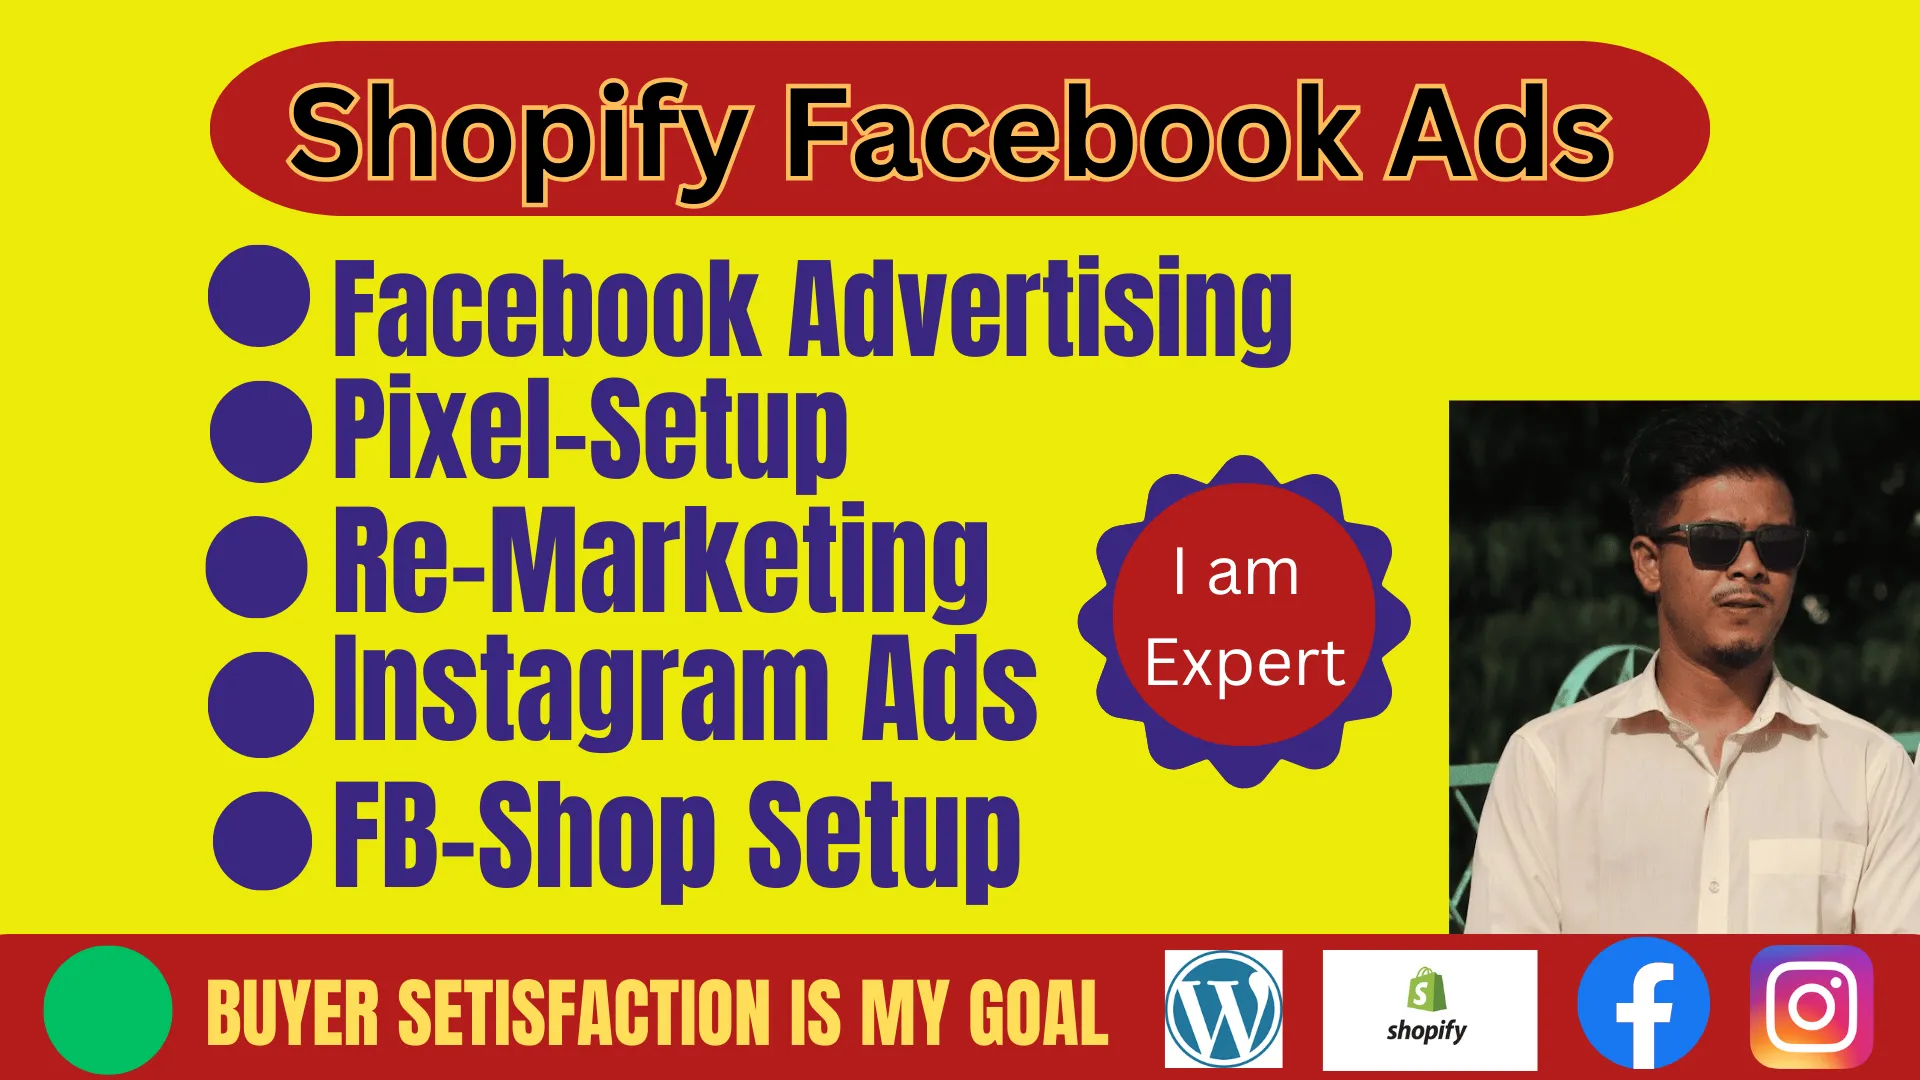 Hello Business Owner,

Are you looking for WordPress/Shopify Facebook ads and Instagram advertising specialist who can advertise your products with High ROAS?

I am a Professional Facebook ads campaign, and Instagram ads Marketer. I will promote your product or service to targeted customers through Facebook ads and Instagram ads. I know how to get more sales from creative advertisements and I use Trending Marketing Strategies I will help you get high-quality TRAFFIC, LEADS, and SALES.

My service:
☑️All Types of Facebook and Instagram ads setup & manage
☑️Research High converting targeted audience
☑️Shopify Facebook ads
☑️Lead ads campaign and Retargeting Conversion ads campaign
☑️Google ads & PPC campaign
☑️Google Display campaign
☑️YouTube Video ads setup and manage